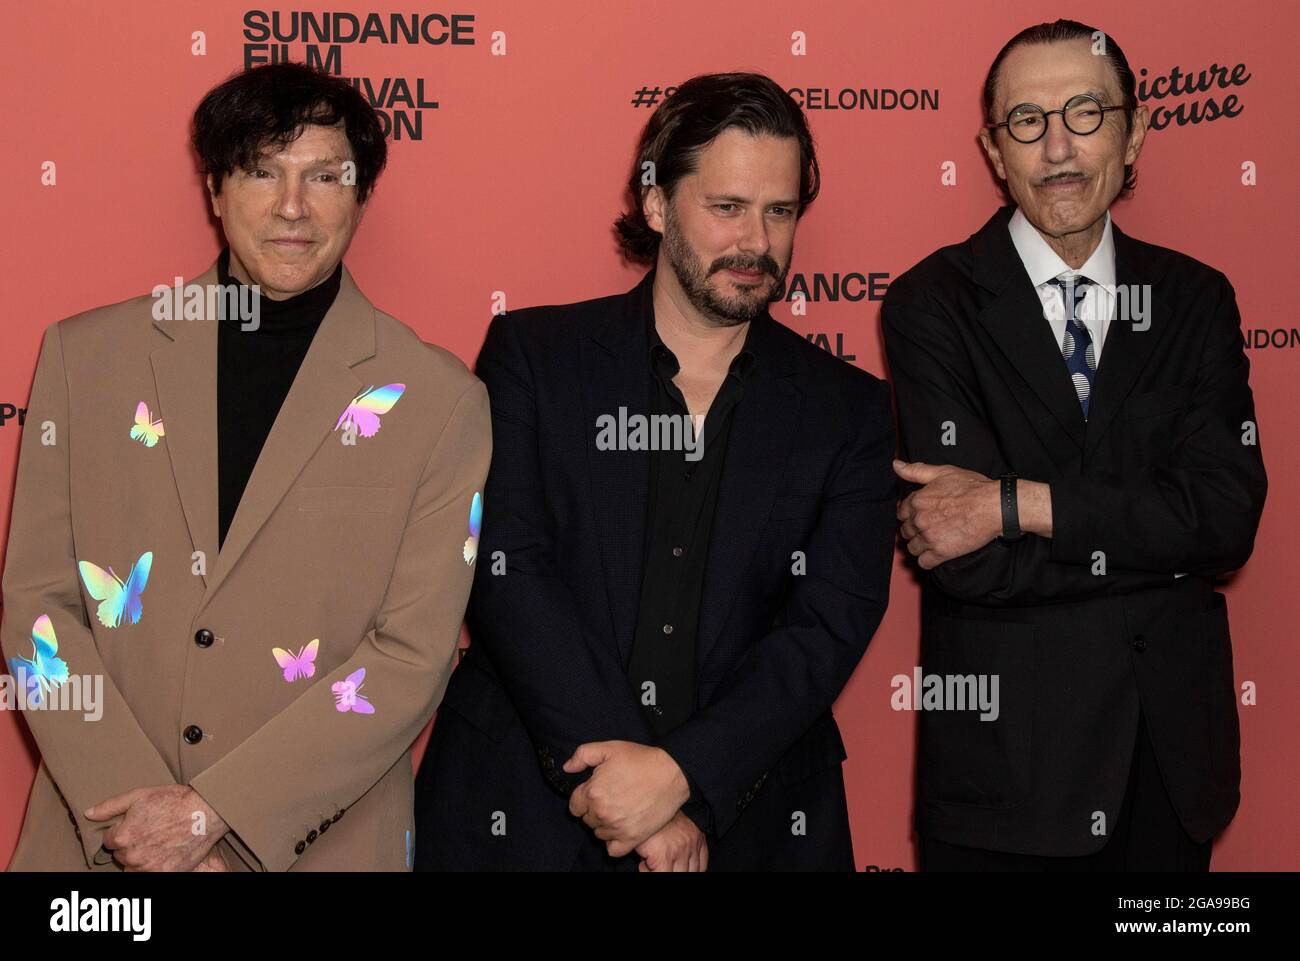 London, UK. 29th July, 2021. London, UK. Russel Mael, Edgar Wright and Ron Mael attend The Sparks Brothers Premiere at Sundance Festival 2021 at Picture house Central. 7th May 2021 Credit: Martin Evans/Alamy Live News Stock Photo